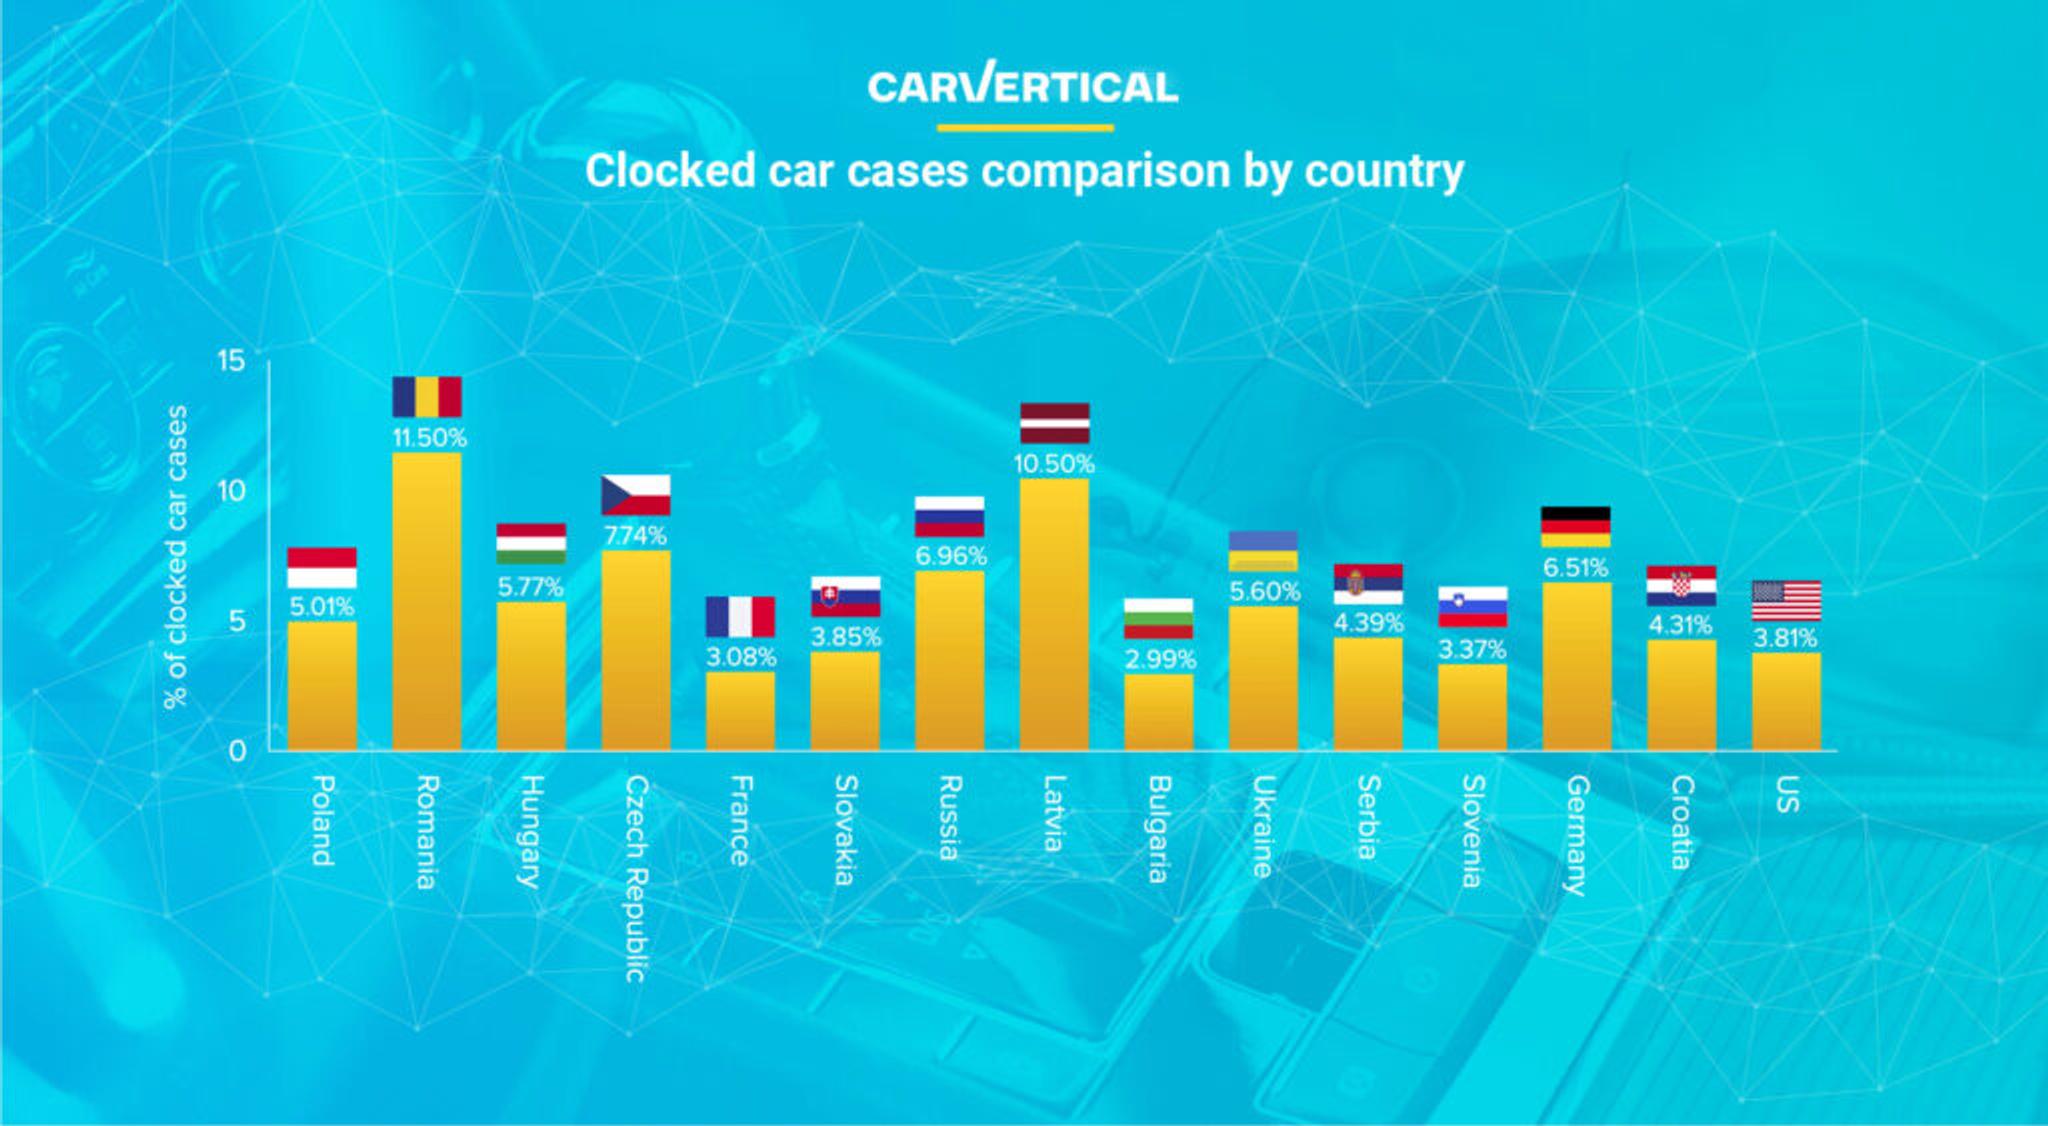 Clocked car cases comparison by country